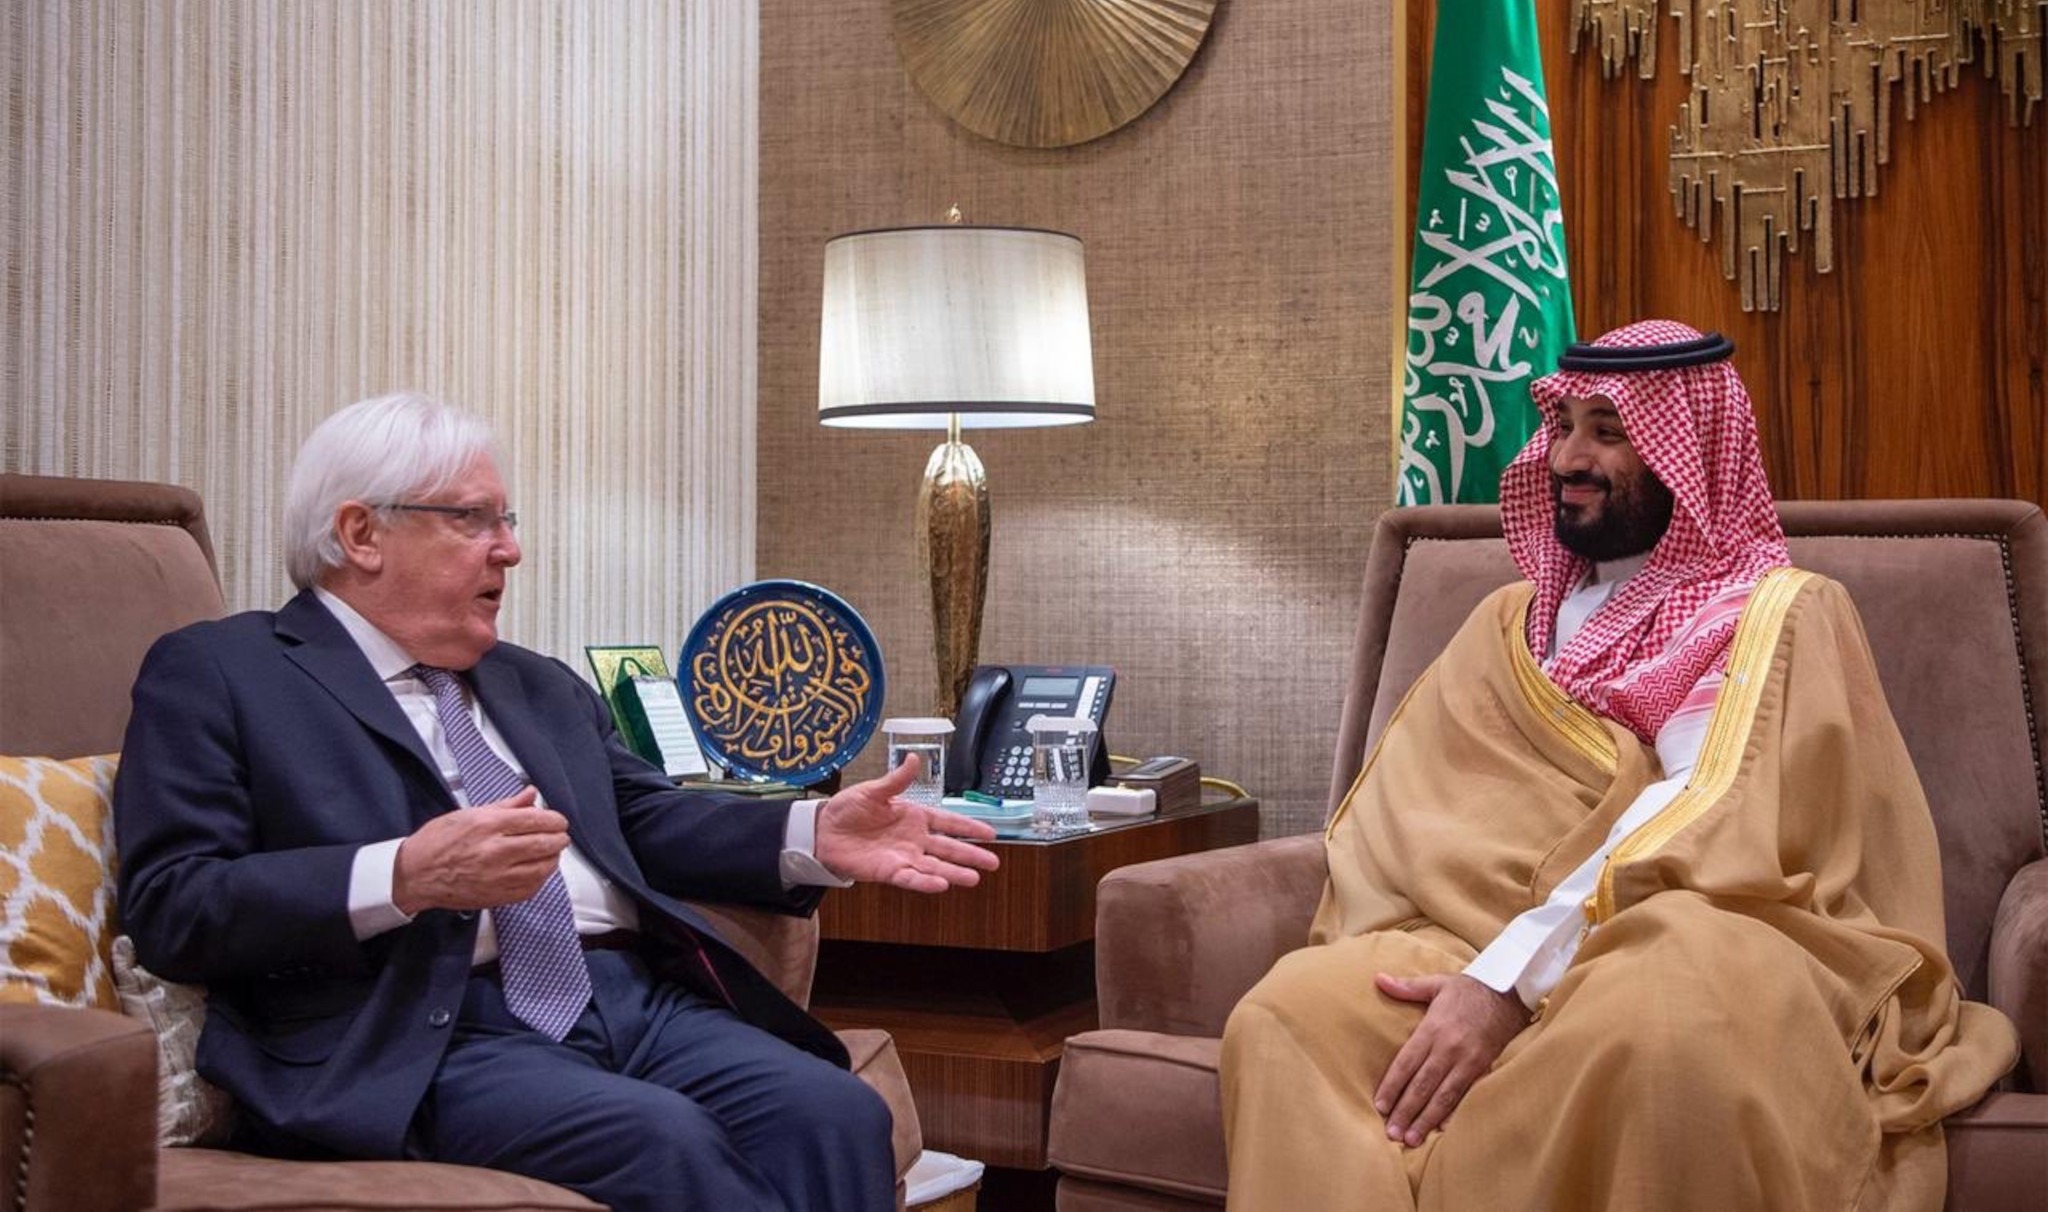 Former UN envoy to Yemen linked to businessman who worked in Saudi and UAE energy